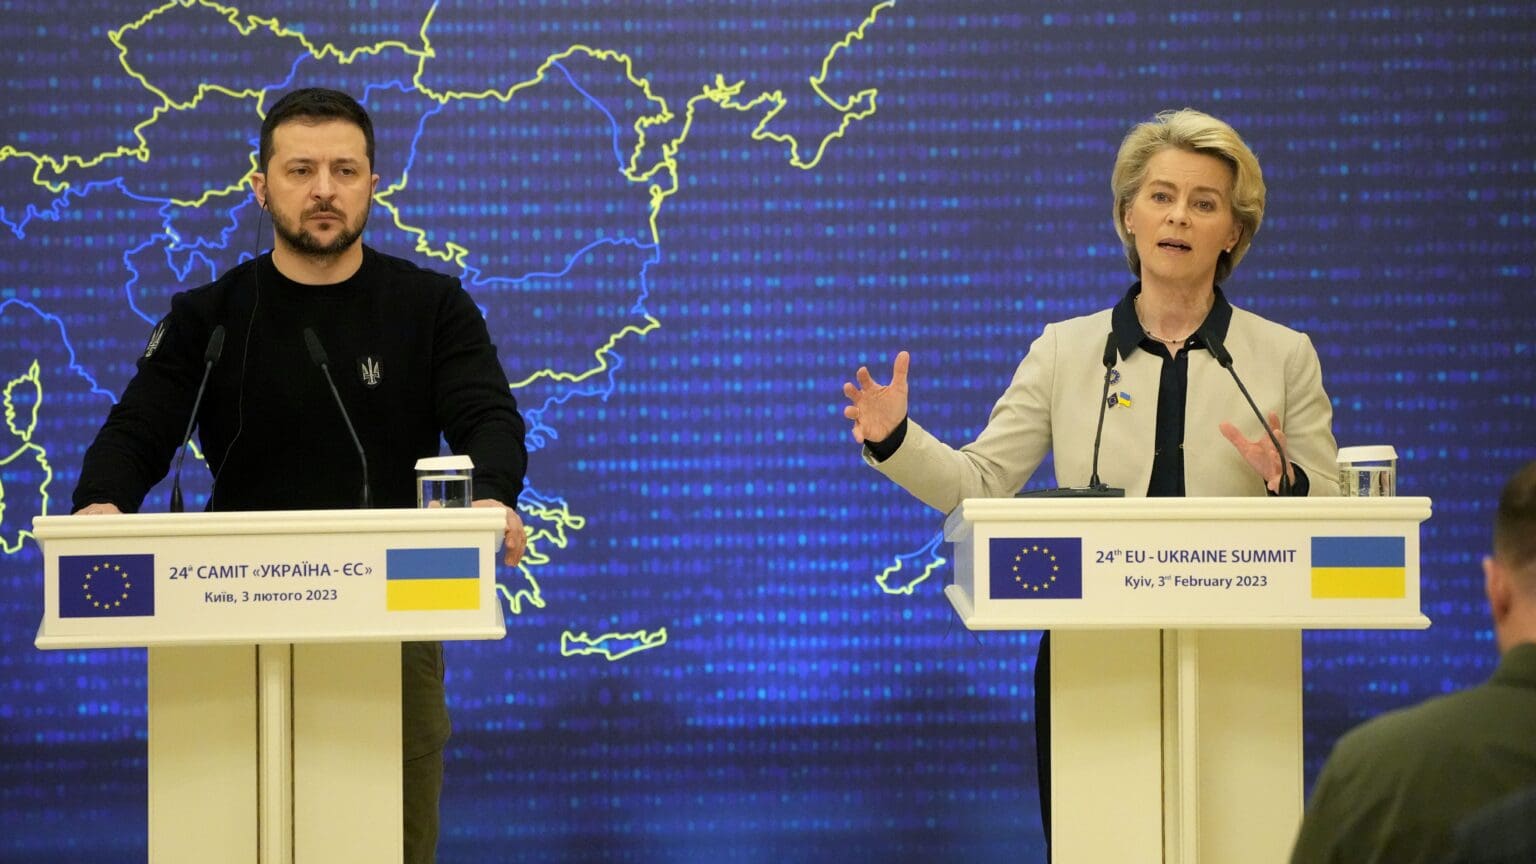 Ukraine Plans to Join EU in Two Years, Member States Doubtful